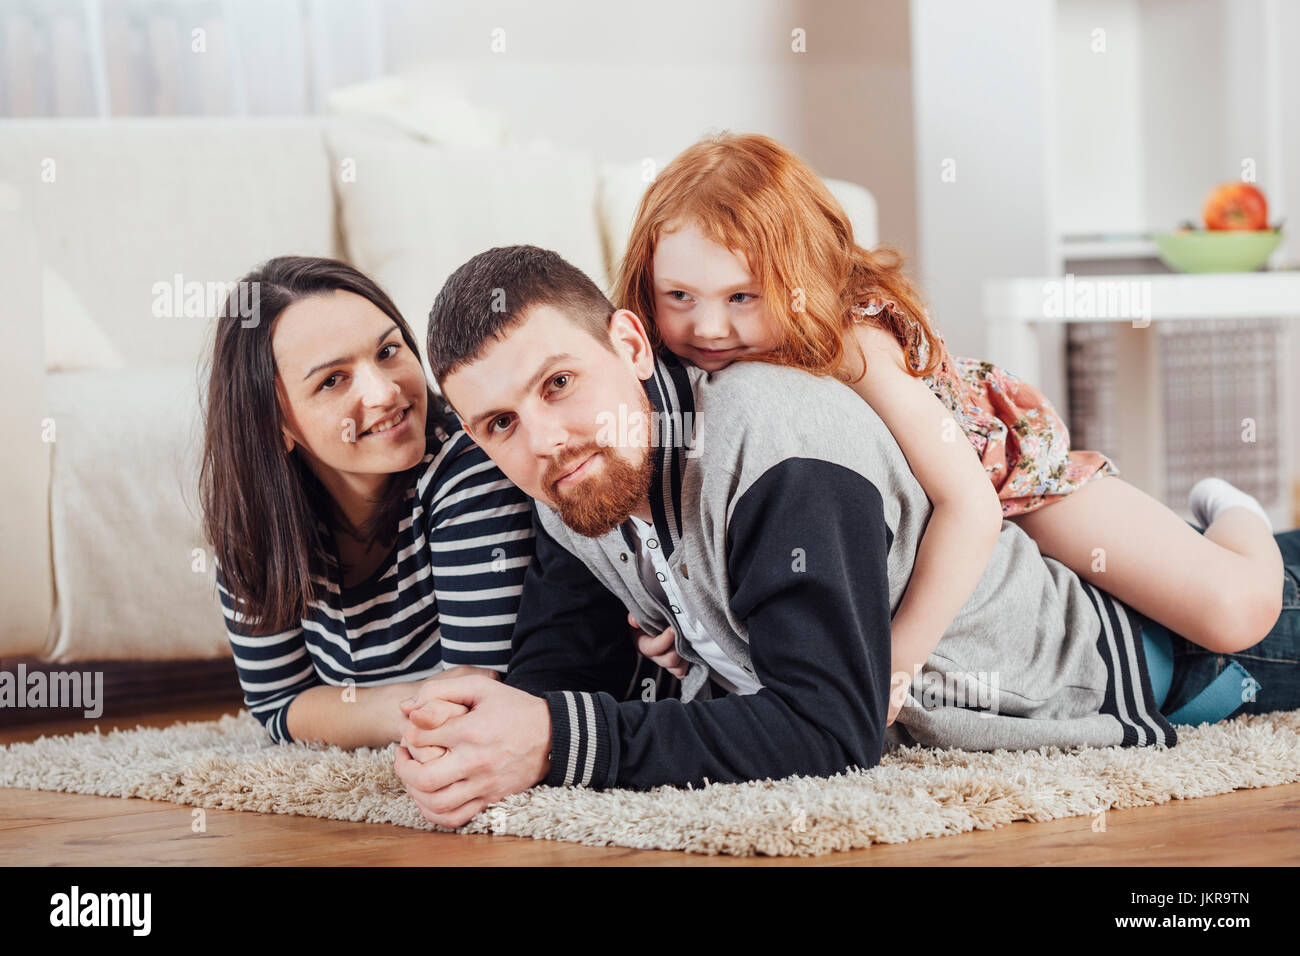 Portrait of smiling family lying on carpet at home Stock Photo